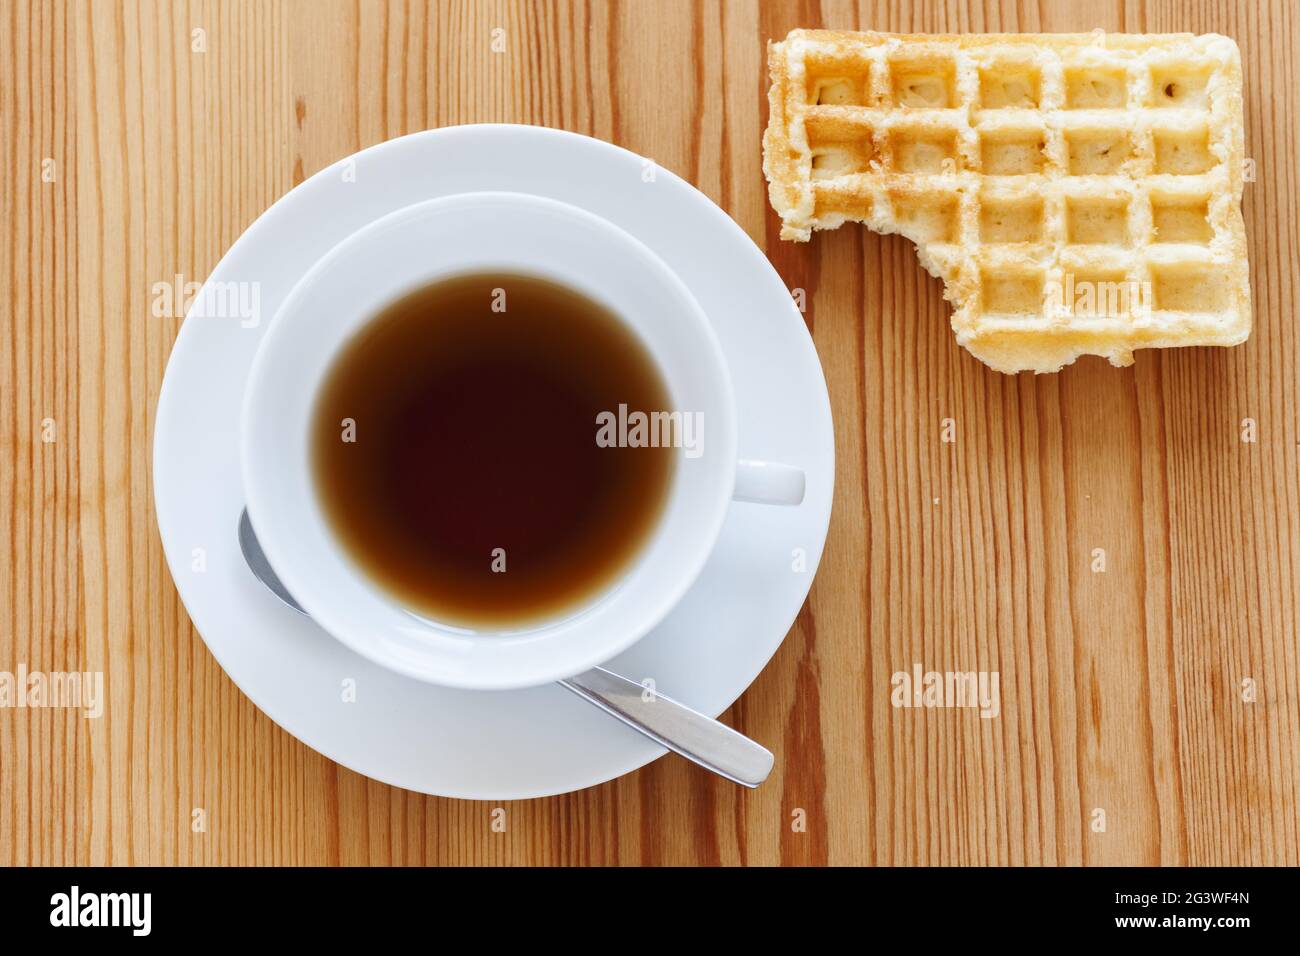 Teacup with biscuit on top right corner Stock Photo